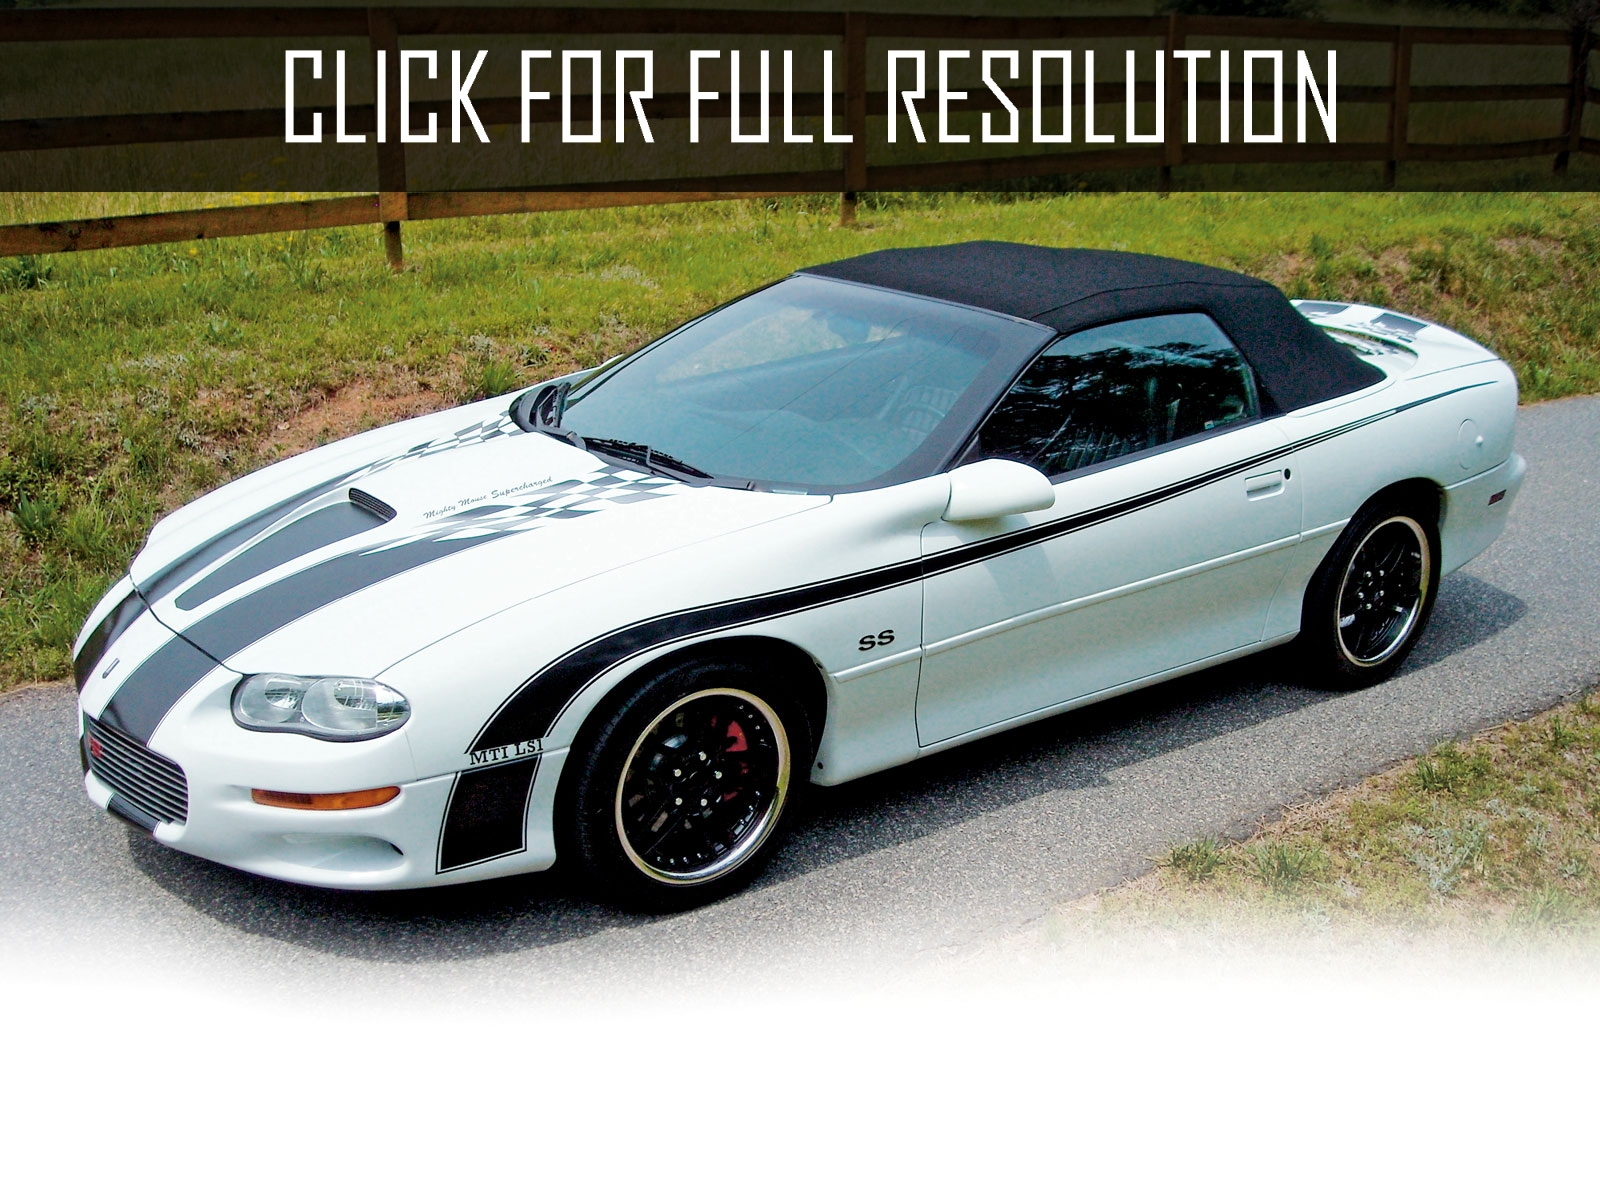 2001 Chevrolet Camaro news, reviews, msrp, ratings with